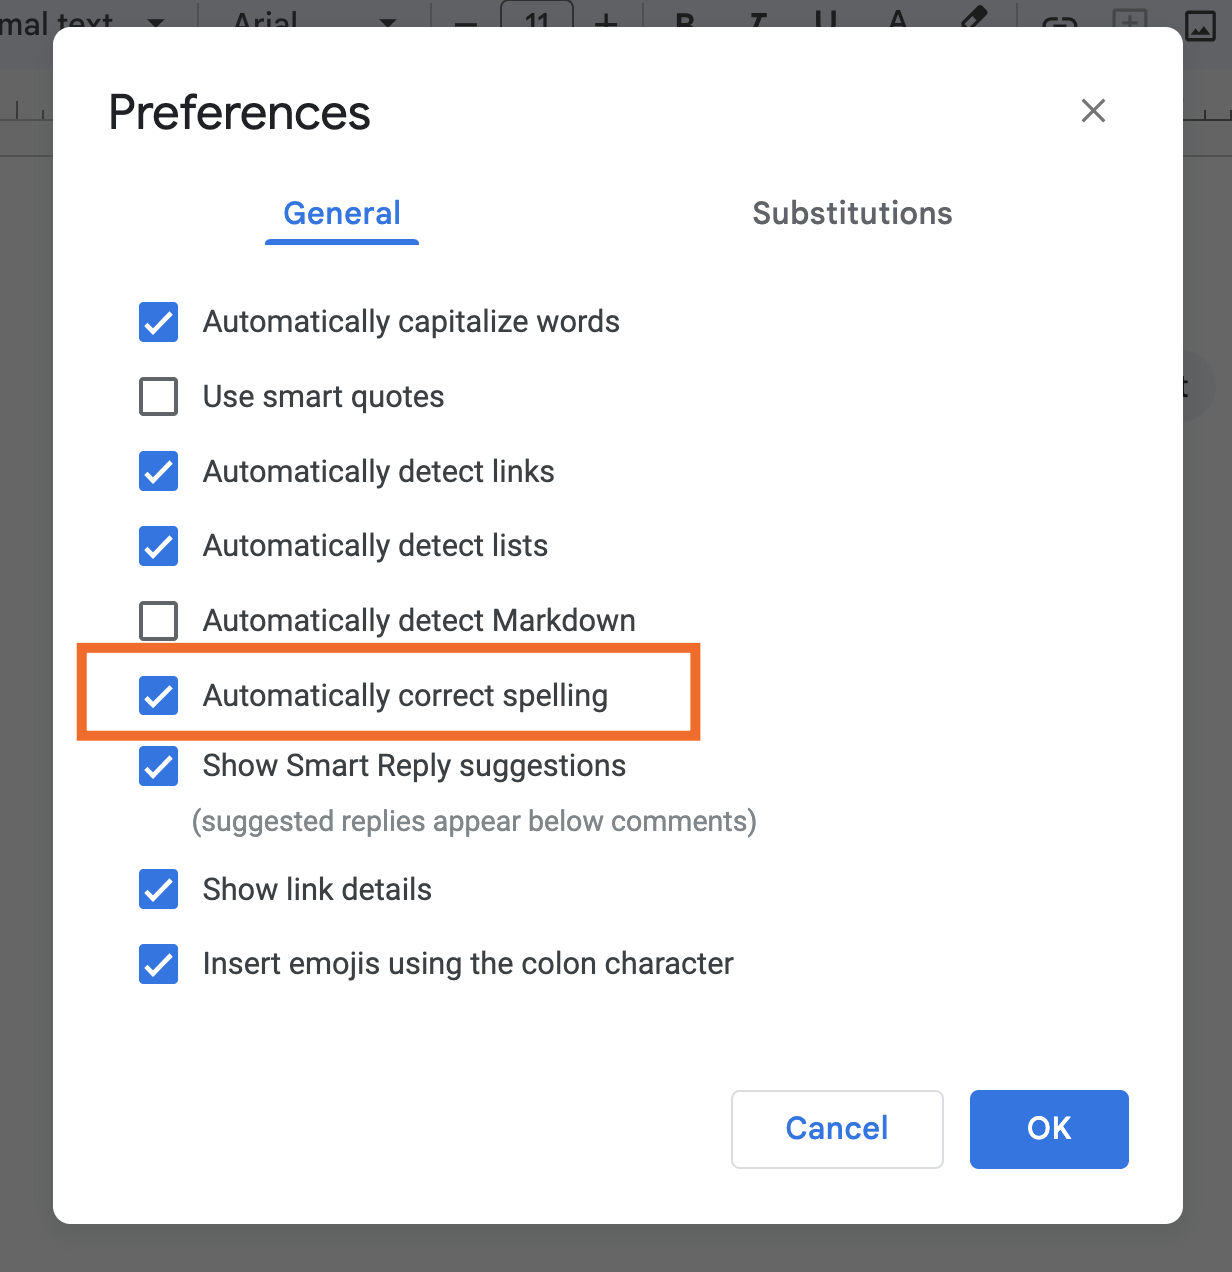 The "Automatically correct spelling" option in Google Docs